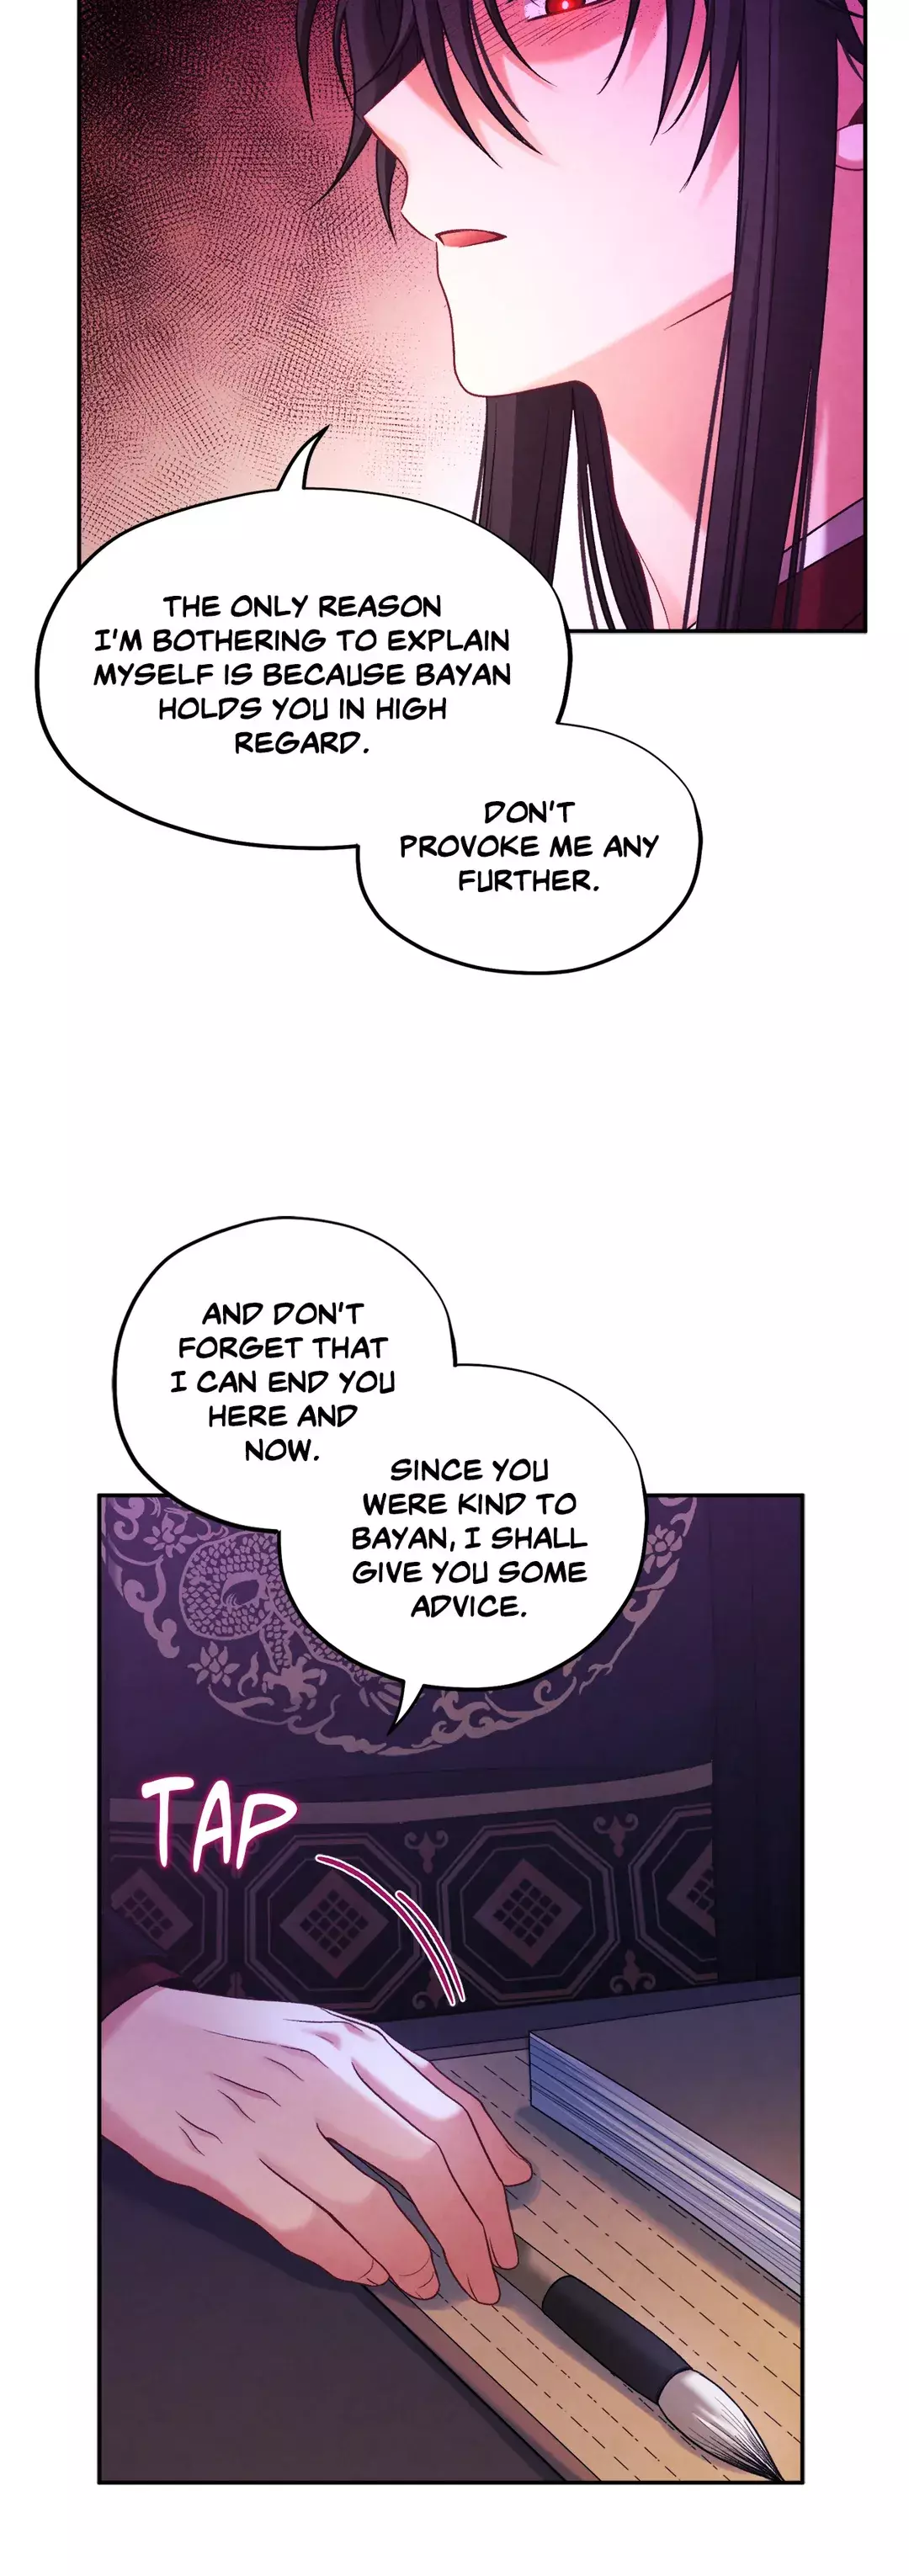 Elixir Of The Sun - 96 page 29-0d01035f